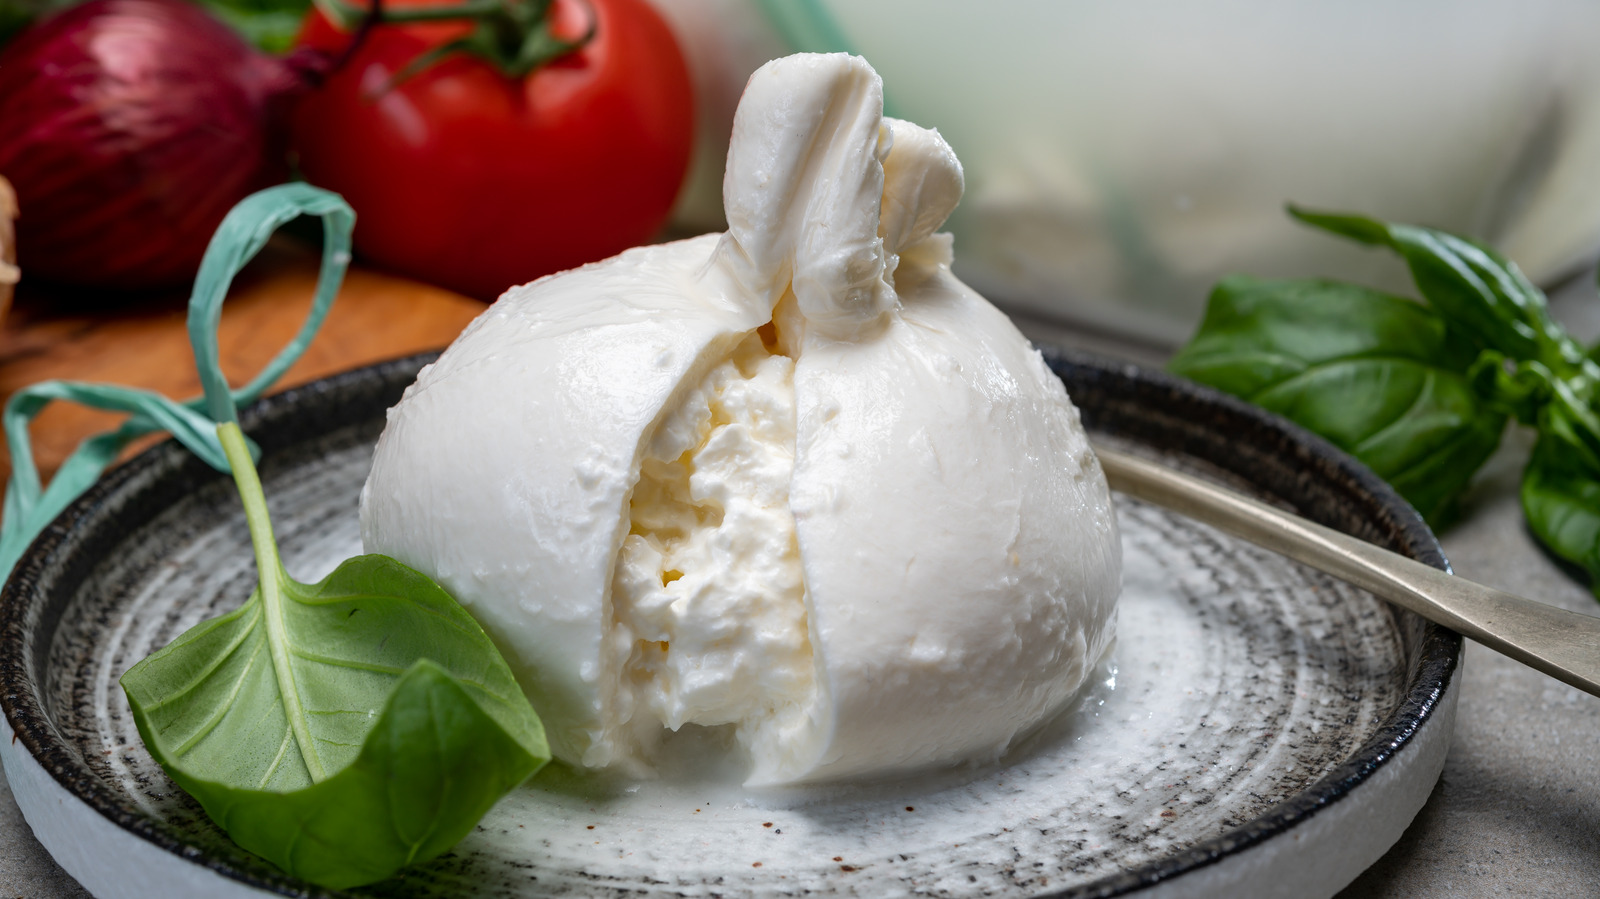 https://www.tastingtable.com/img/gallery/14-absolute-best-substitutes-for-burrata-cheese/l-intro-1677516823.jpg